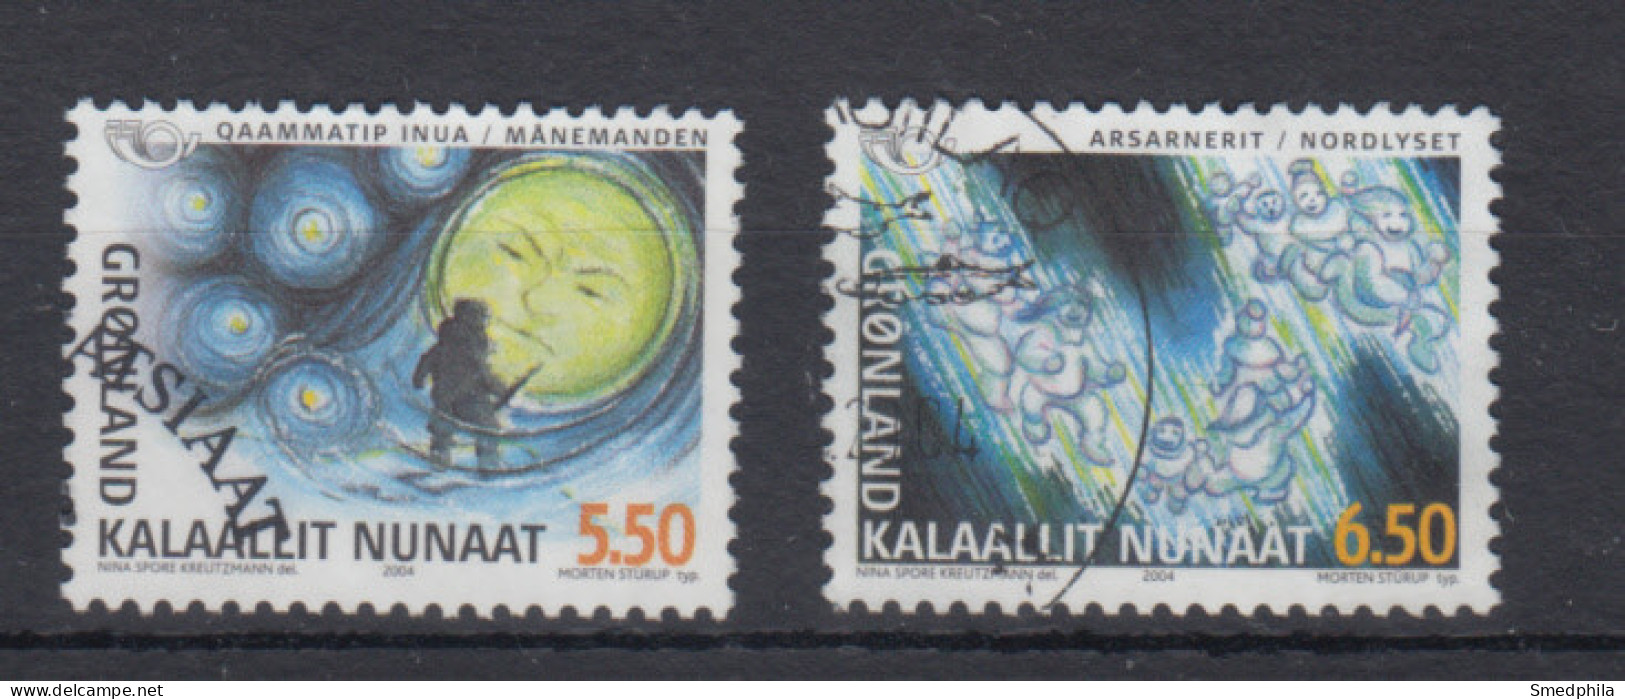 Greenland 2004 - Michel 414-415 Used - Used Stamps